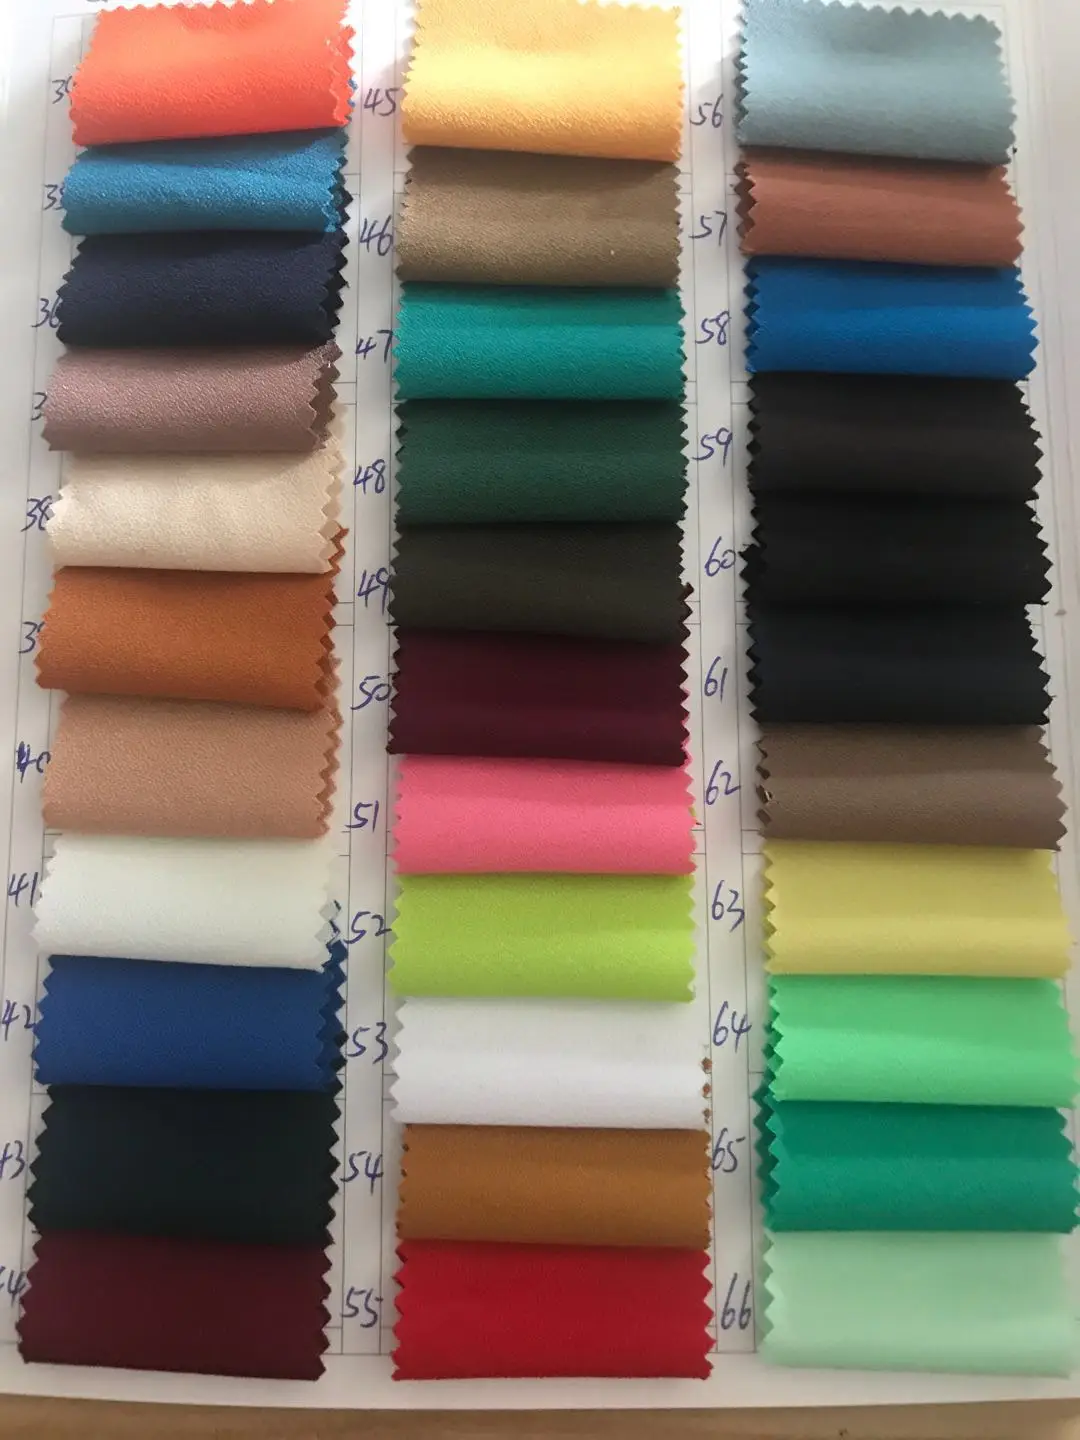 
High quality 4 way streches moss crepe fabric 